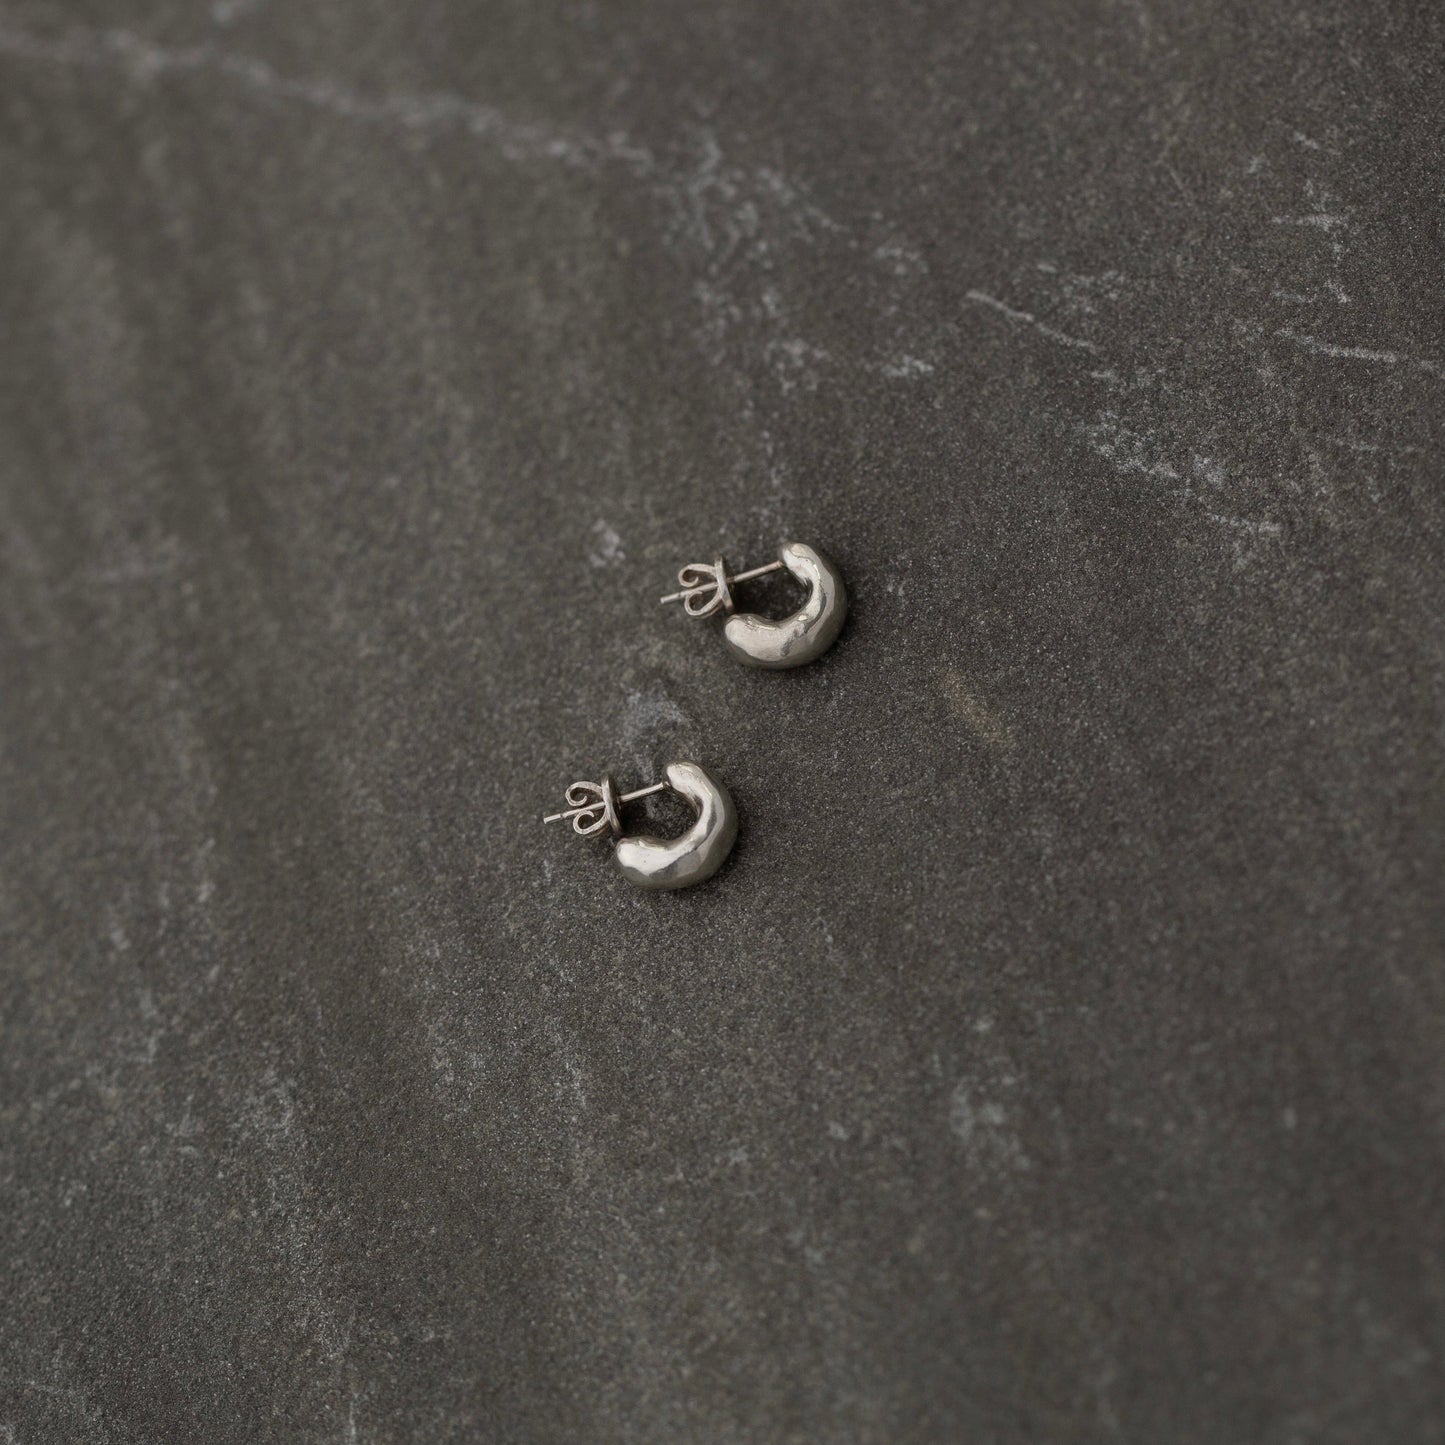 Small curving earrings / silver